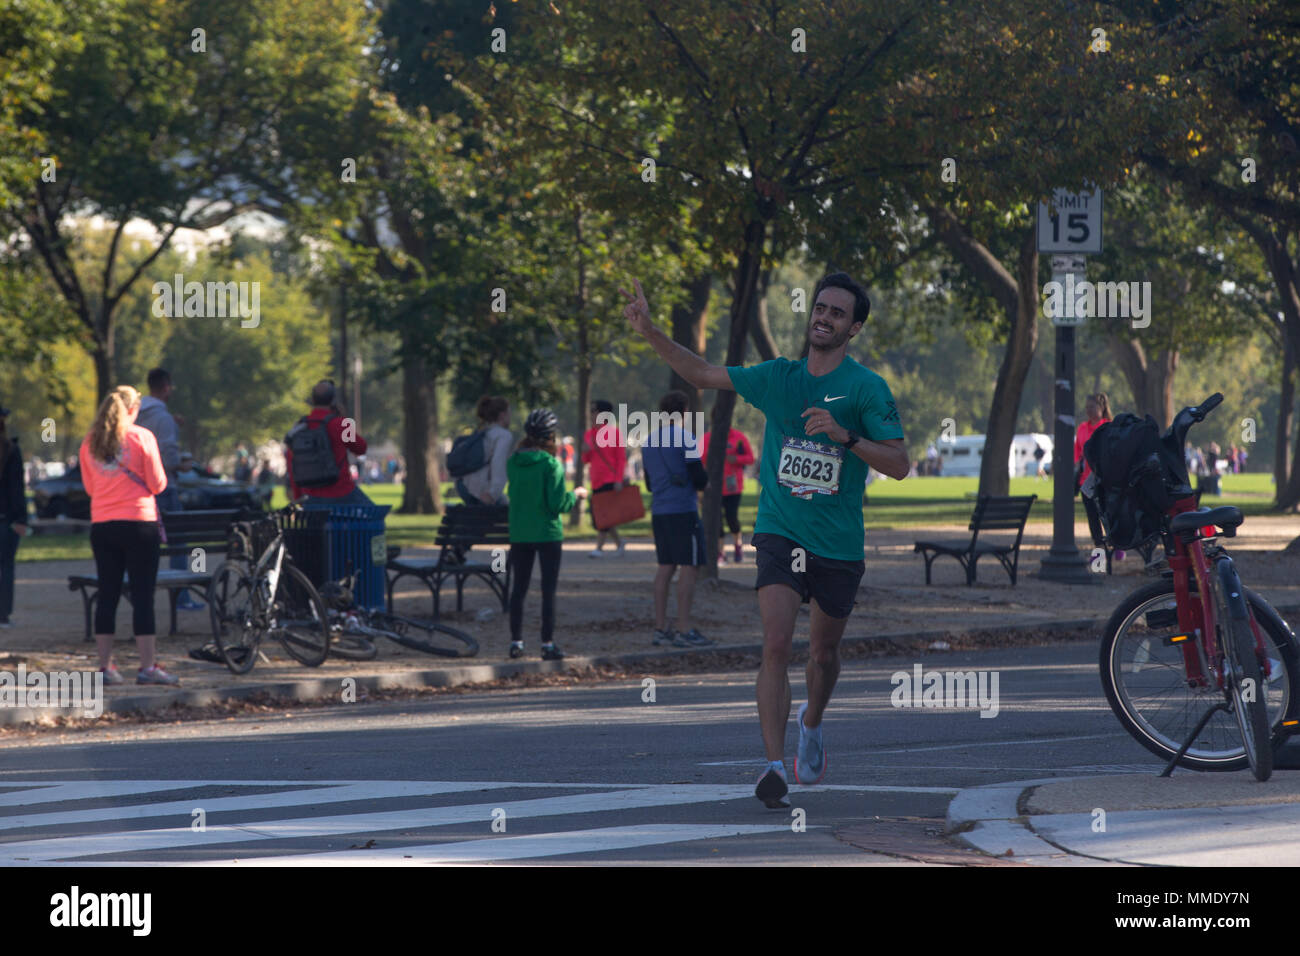 Juan Carlos Velasquez from Naucalpan Estado De, Mexico, takes part in the 42nd annual running of the Marine Corps Marathon, traveling on a monumental course through Washington, D.C. and finishing at the Marine Corps War Memorial, Arlington, Va., Oct. 22, 2017. Also known as 'The People's Marathon,' the 26.2 mile race drew roughly 30,000 participants to promote physical fitness, generate goodwill in the community, and showcase the organizational skills of the Marine Corps. (U.S. Marine Corps photo by Lance Cpl. Brooke Deiters) Stock Photo